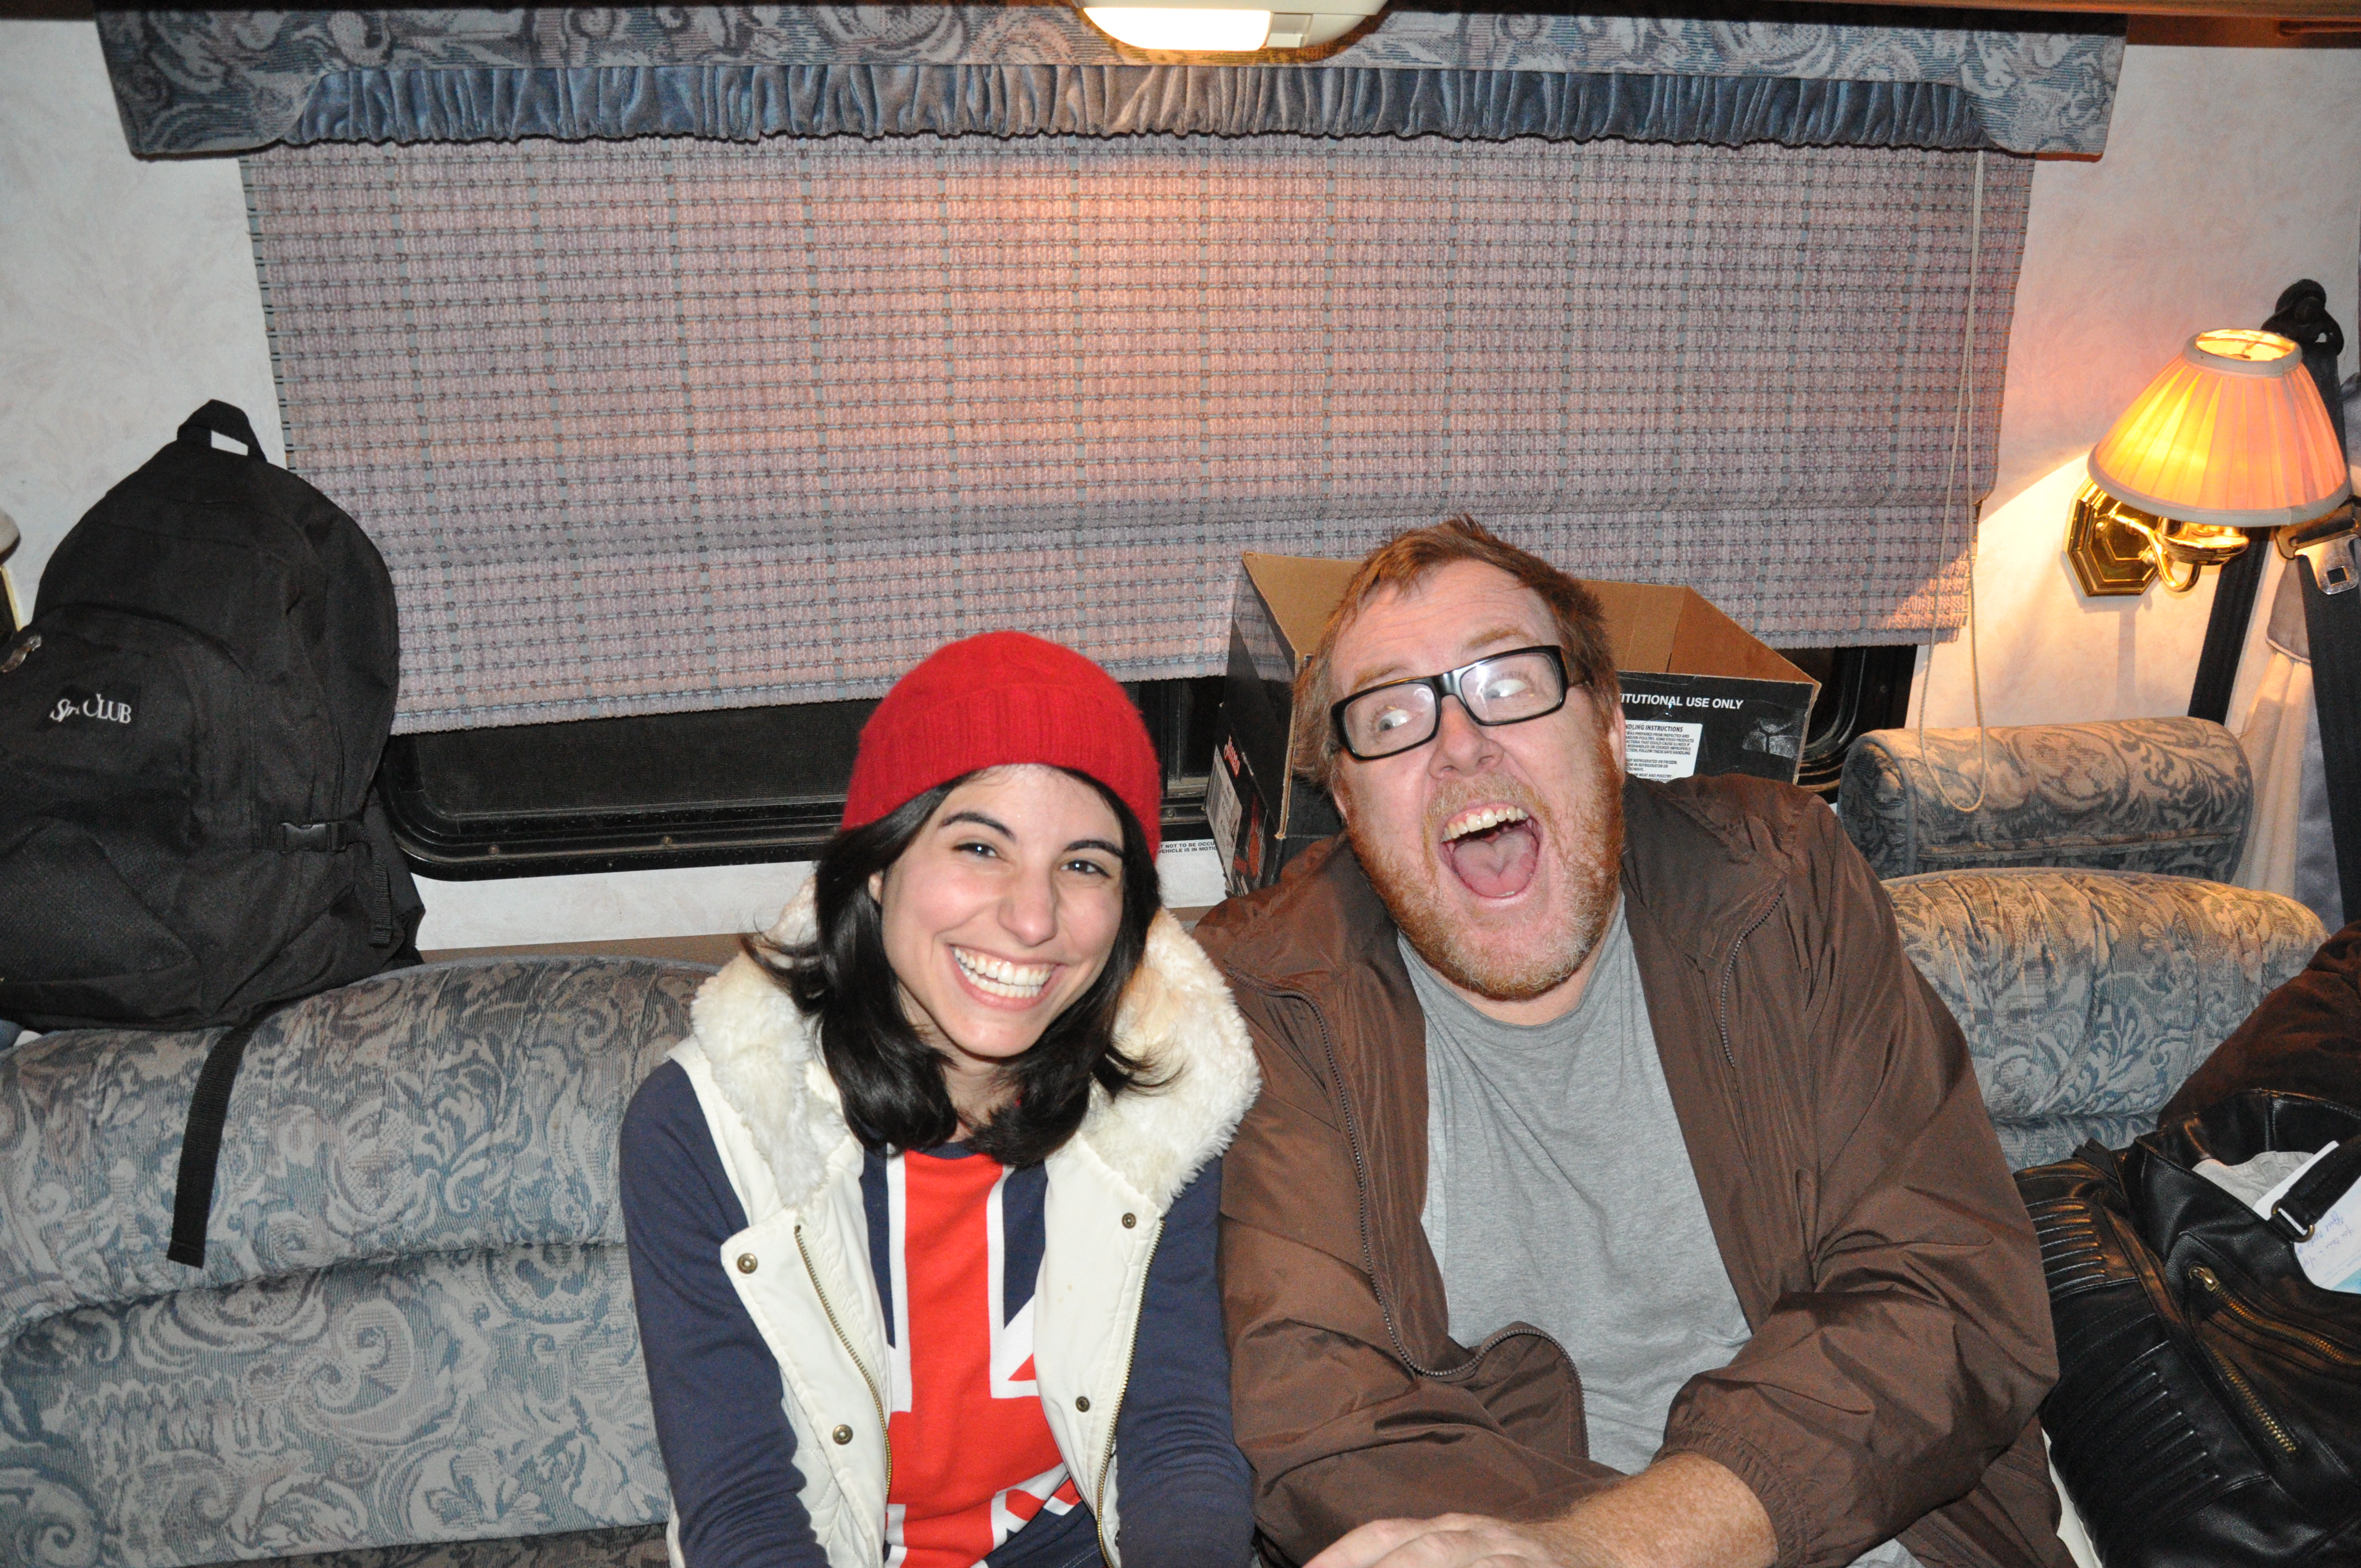 Romina and Steve Agee on the set of The Insomniac.